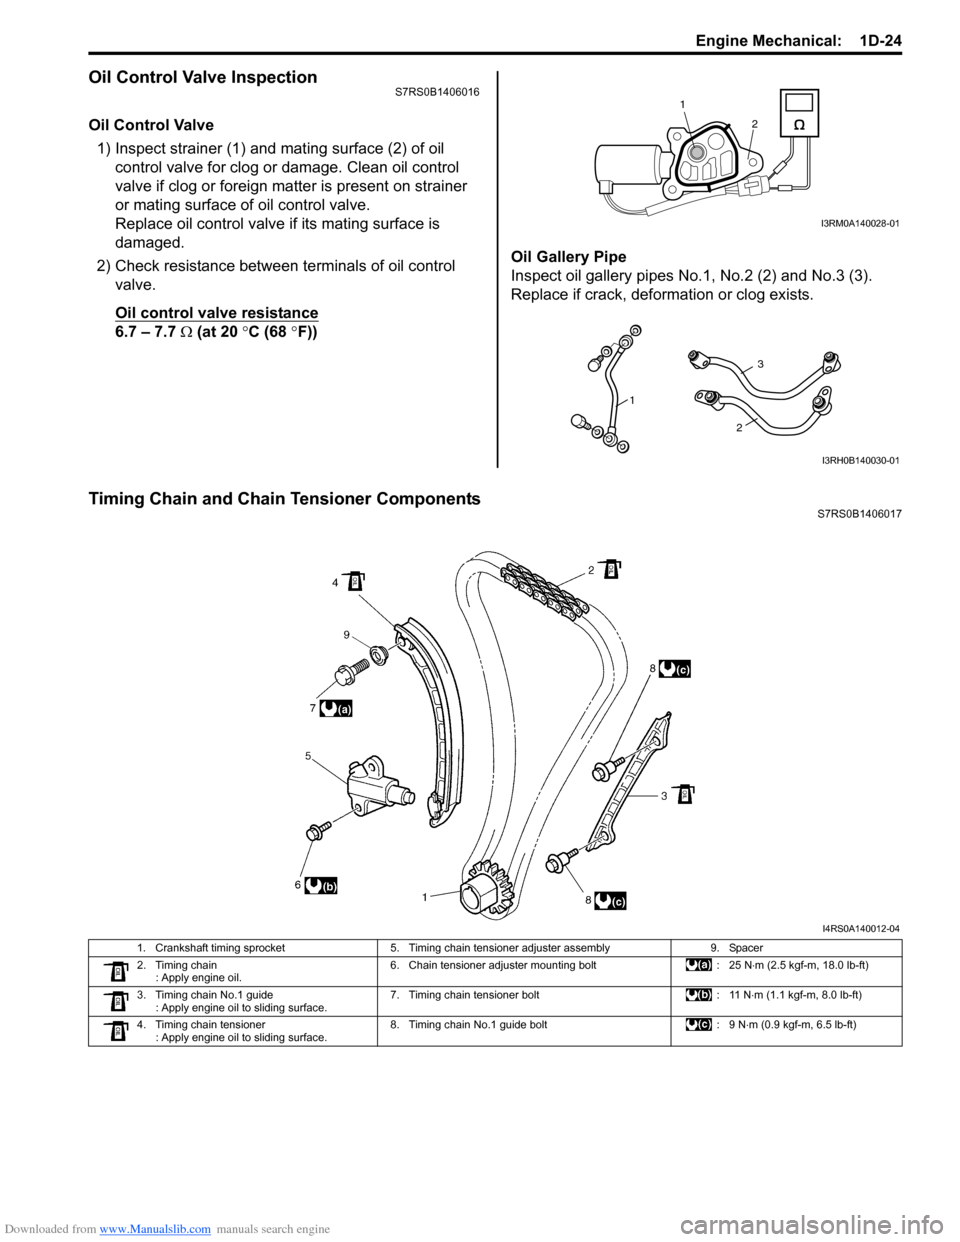 SUZUKI SWIFT 2006 2.G Service Owners Guide Downloaded from www.Manualslib.com manuals search engine Engine Mechanical:  1D-24
Oil Control Valve InspectionS7RS0B1406016
Oil Control Valve1) Inspect strainer (1) and mating surface (2) of oil  con